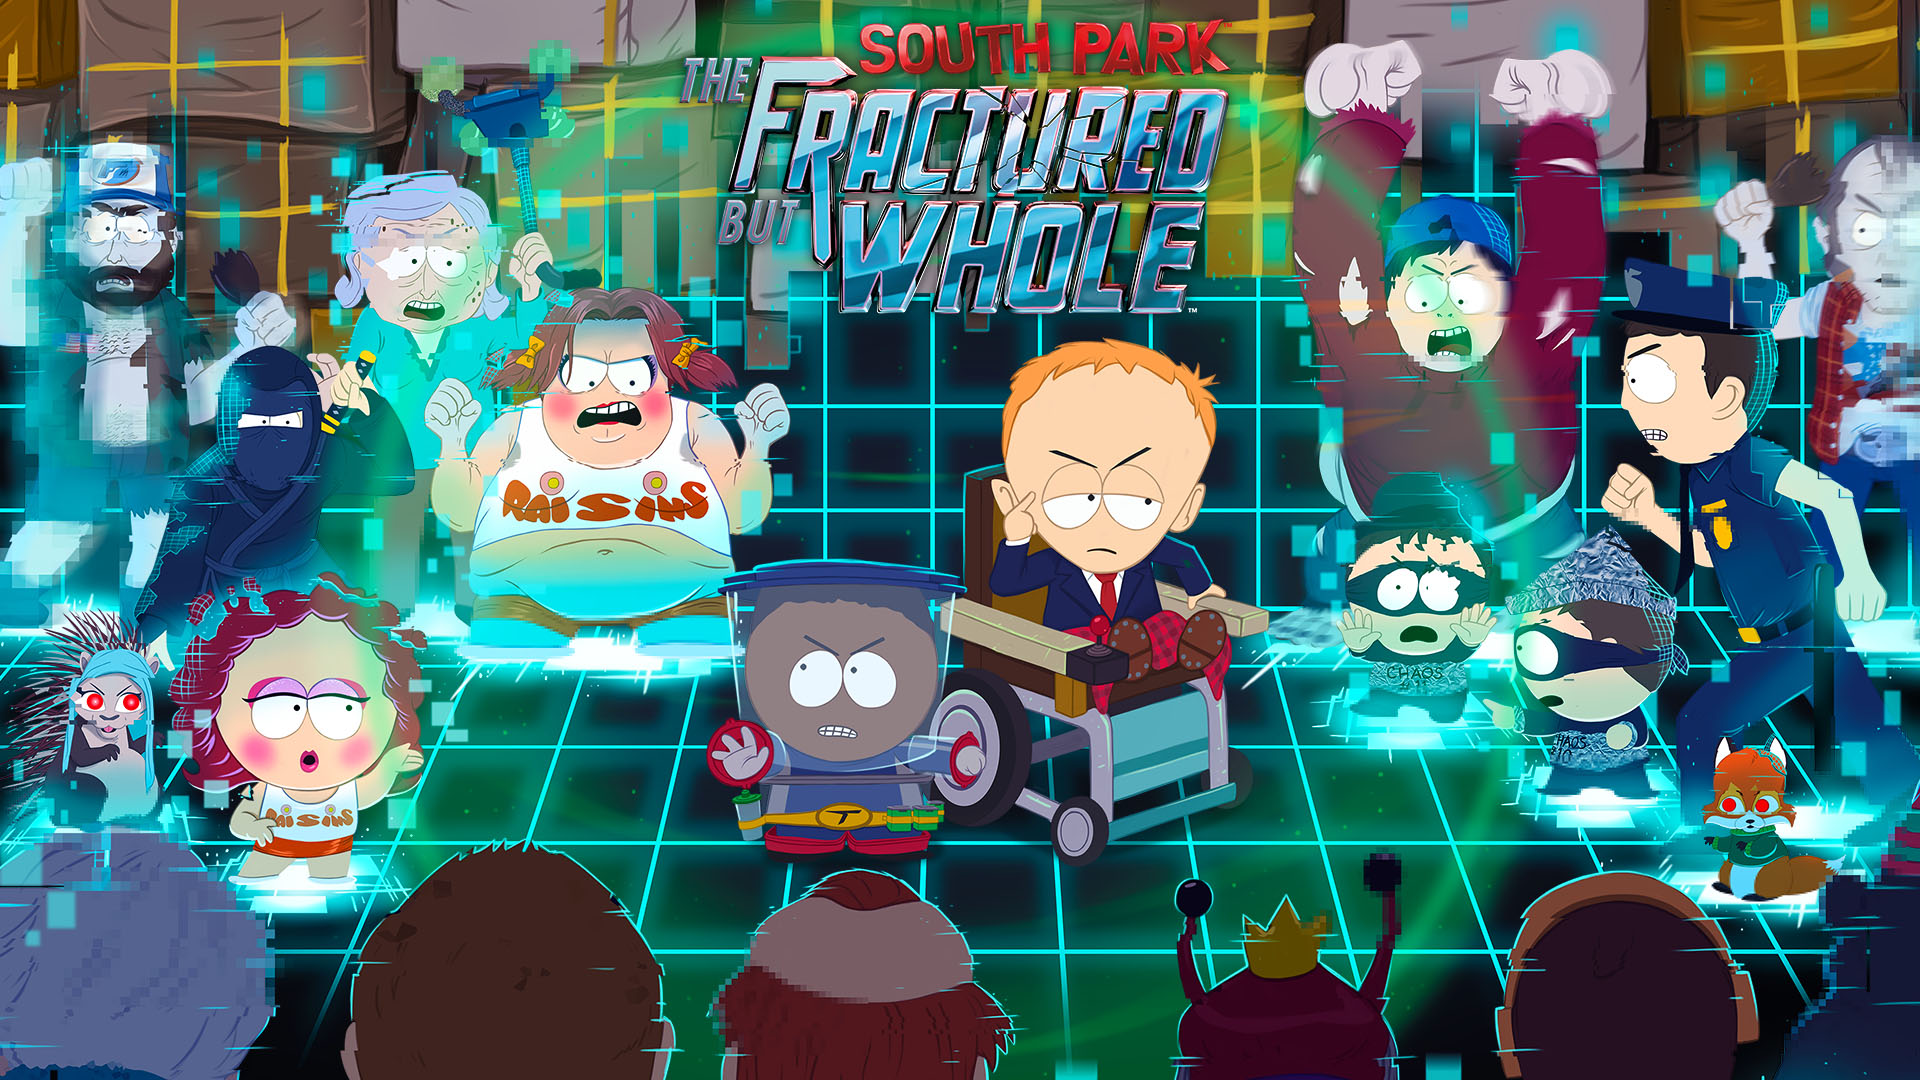 South park the fractured but whole купить ключ steam фото 33